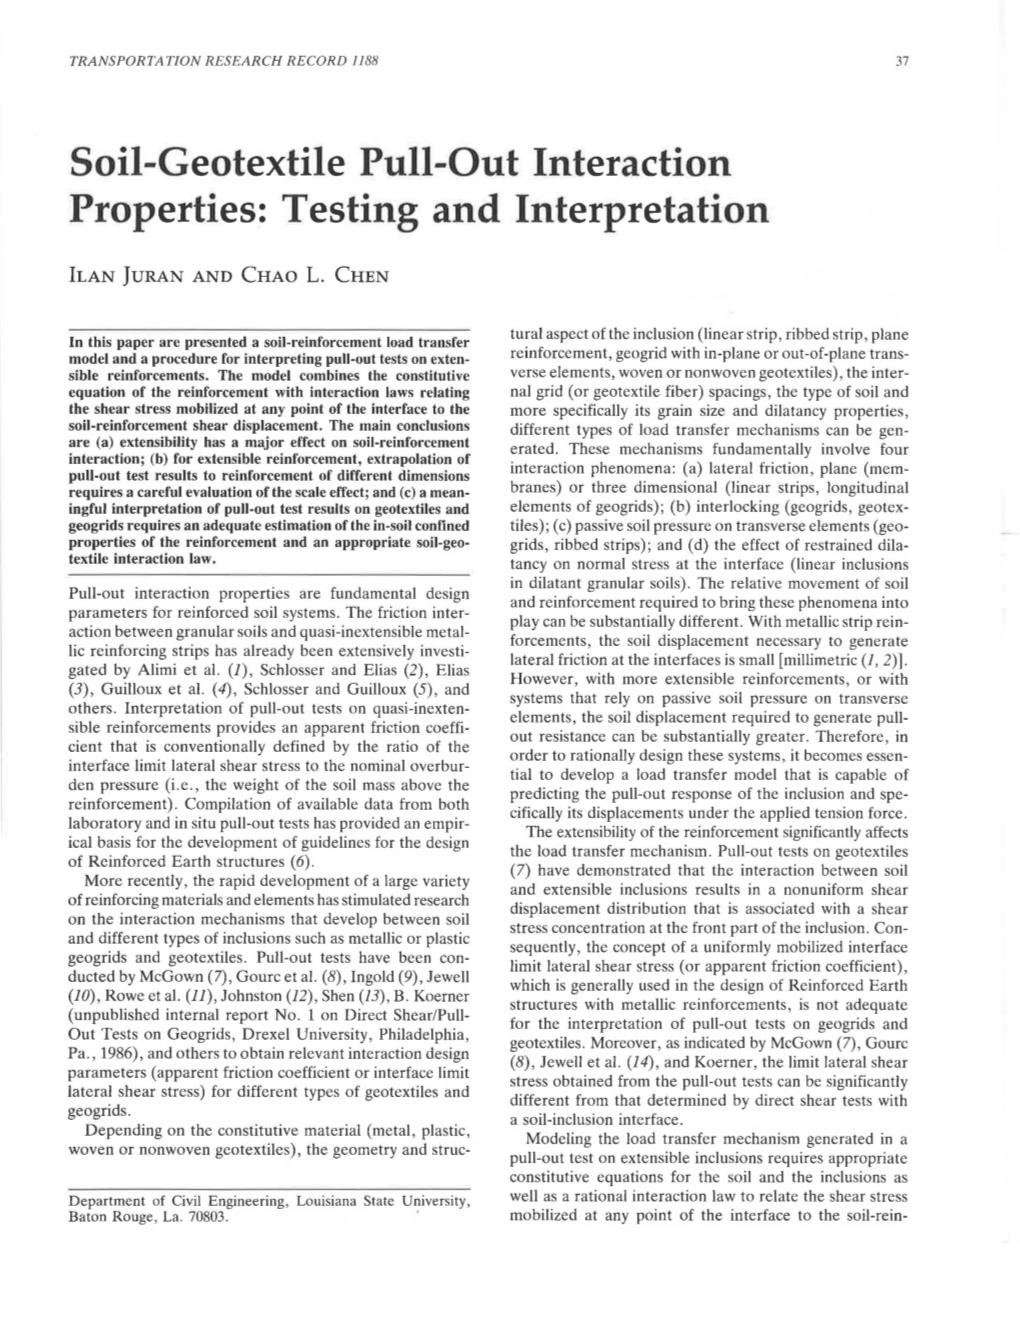 Soil-Geotextile Pull-Out Interaction Properties: Testing and Interpretation